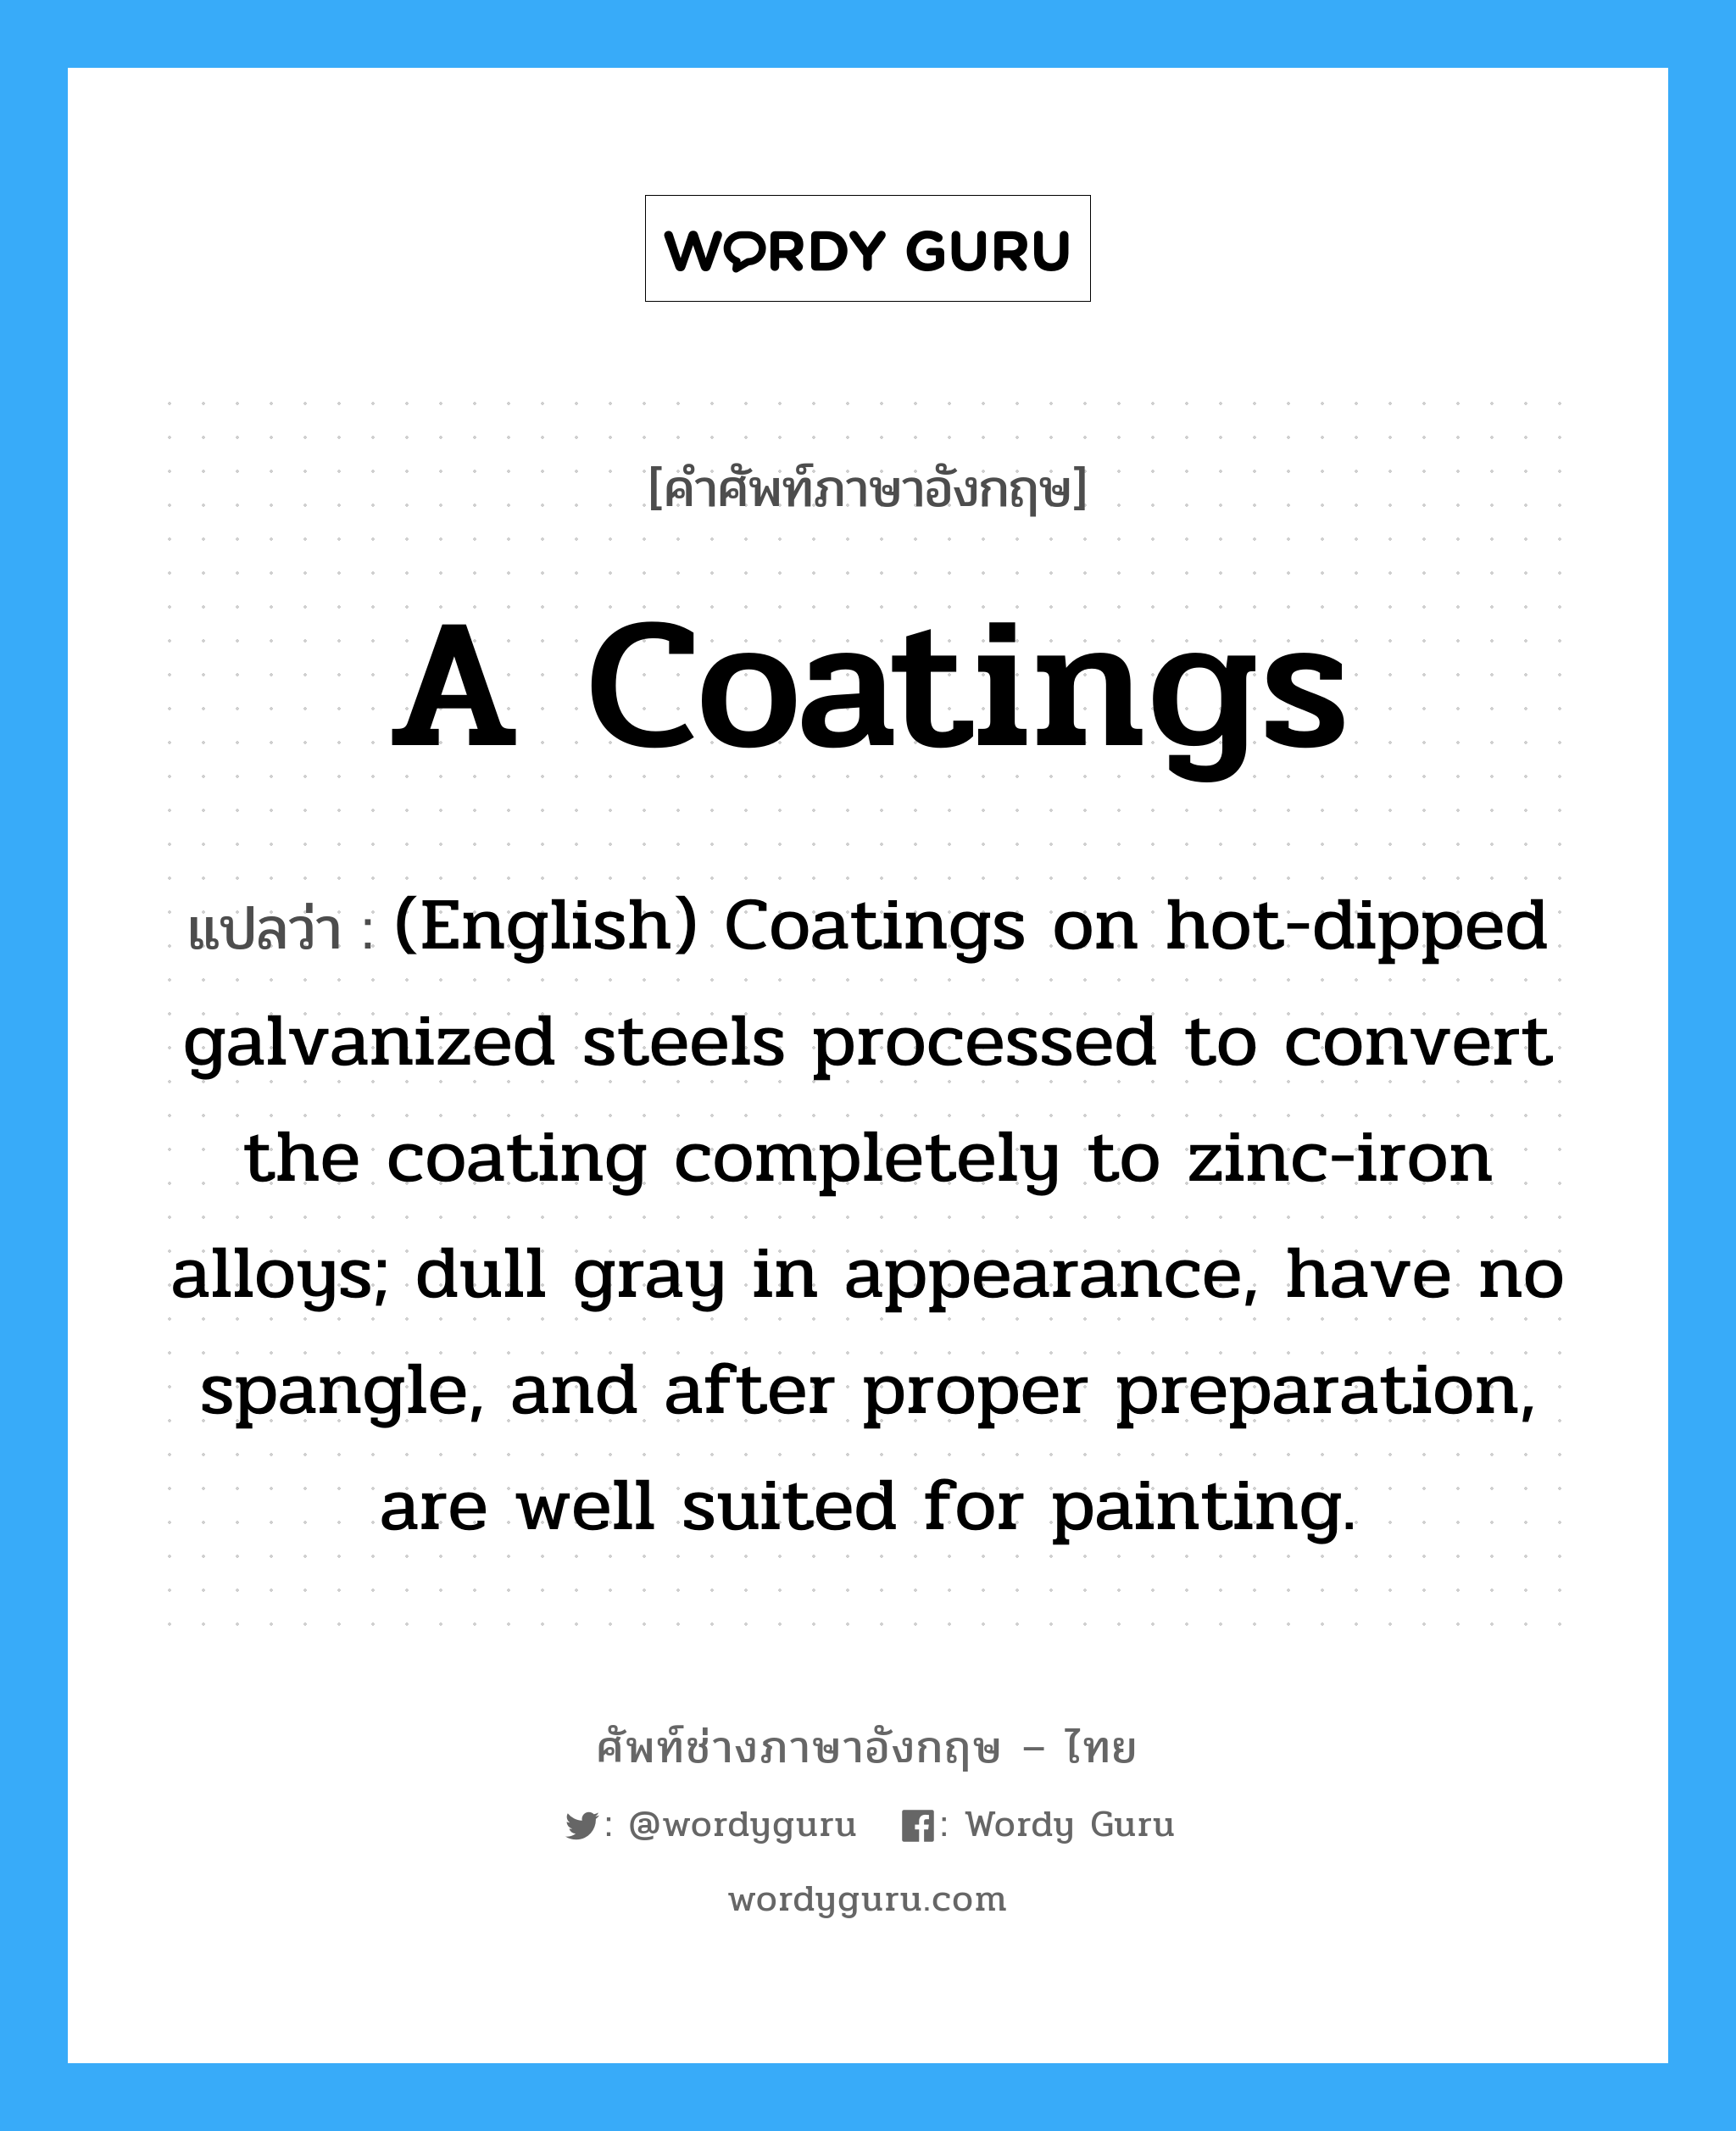 (English) Coatings on hot-dipped galvanized steels processed to convert the coating completely to zinc-iron alloys; dull gray in appearance, have no spangle, and after proper preparation, are well suited for painting. ภาษาอังกฤษ?, คำศัพท์ช่างภาษาอังกฤษ - ไทย (English) Coatings on hot-dipped galvanized steels processed to convert the coating completely to zinc-iron alloys; dull gray in appearance, have no spangle, and after proper preparation, are well suited for painting. คำศัพท์ภาษาอังกฤษ (English) Coatings on hot-dipped galvanized steels processed to convert the coating completely to zinc-iron alloys; dull gray in appearance, have no spangle, and after proper preparation, are well suited for painting. แปลว่า A Coatings